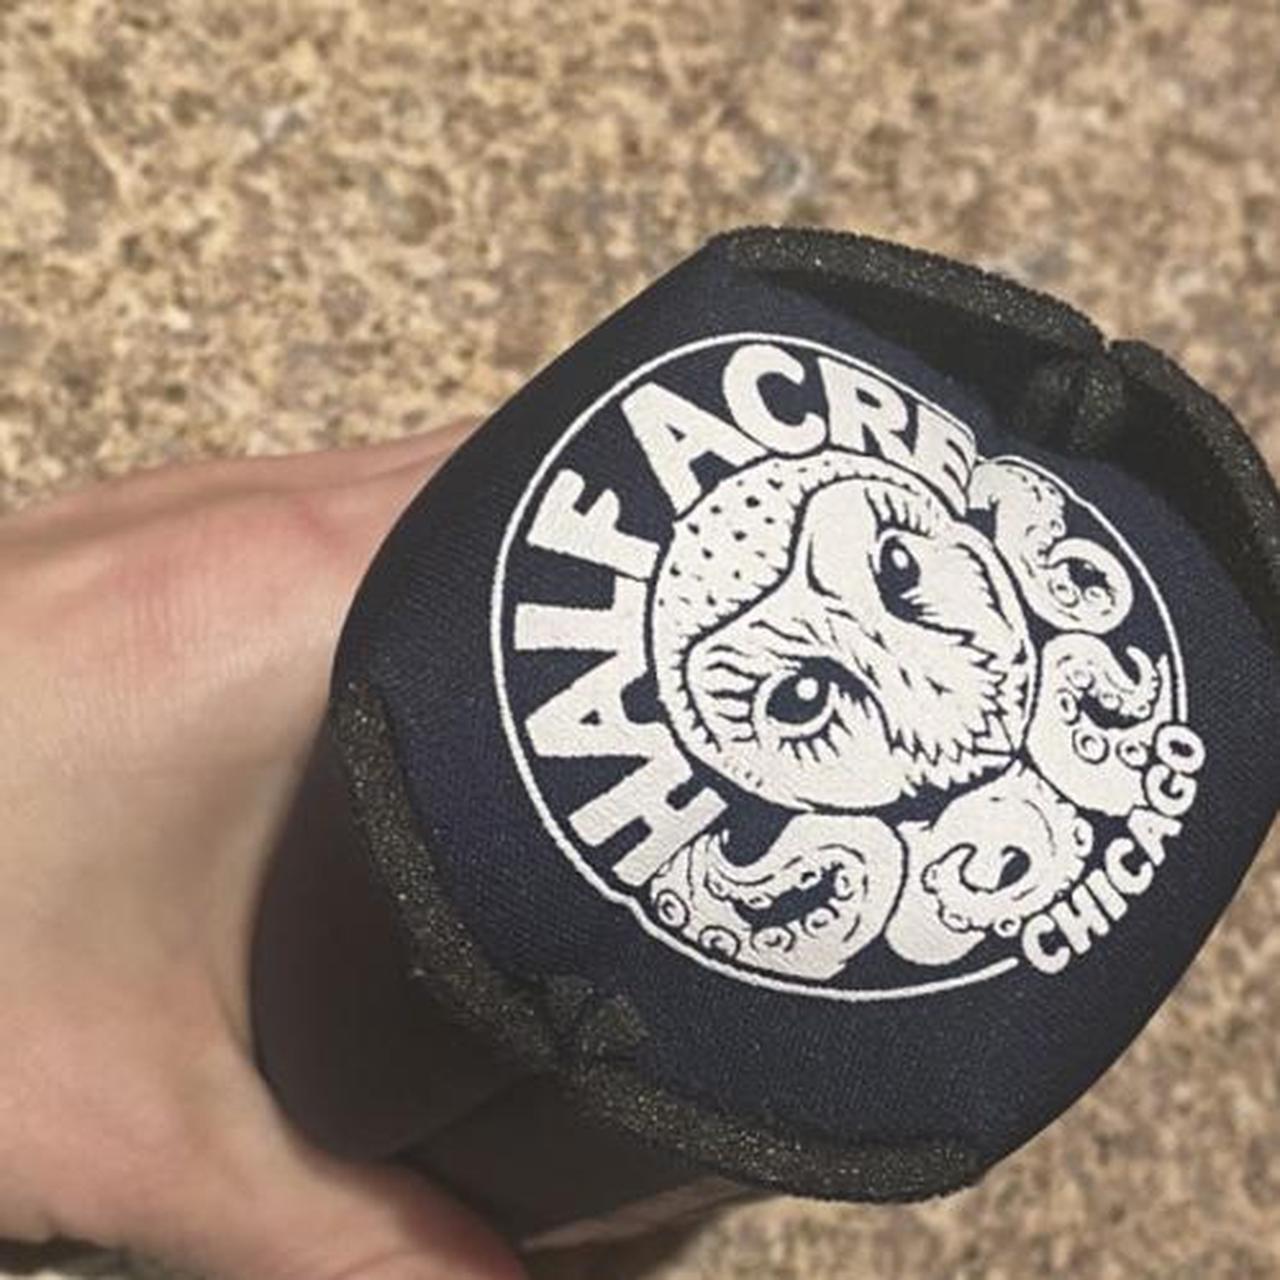 Product Image 3 - HALF ACRE BEER COOZIE! 🍻